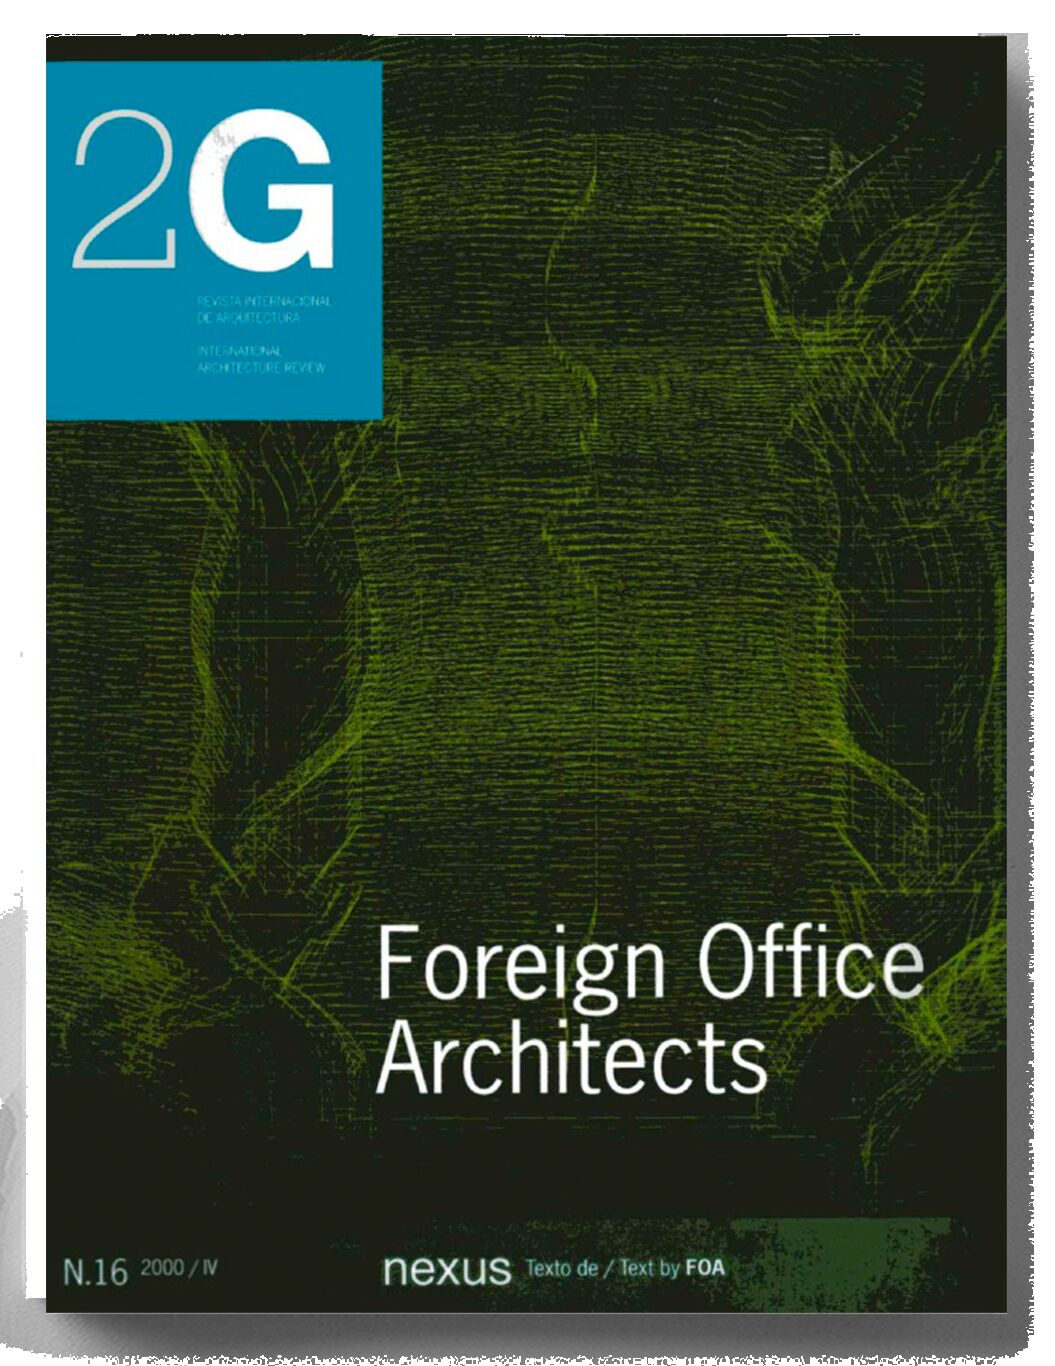 2G Foreign Office Architects